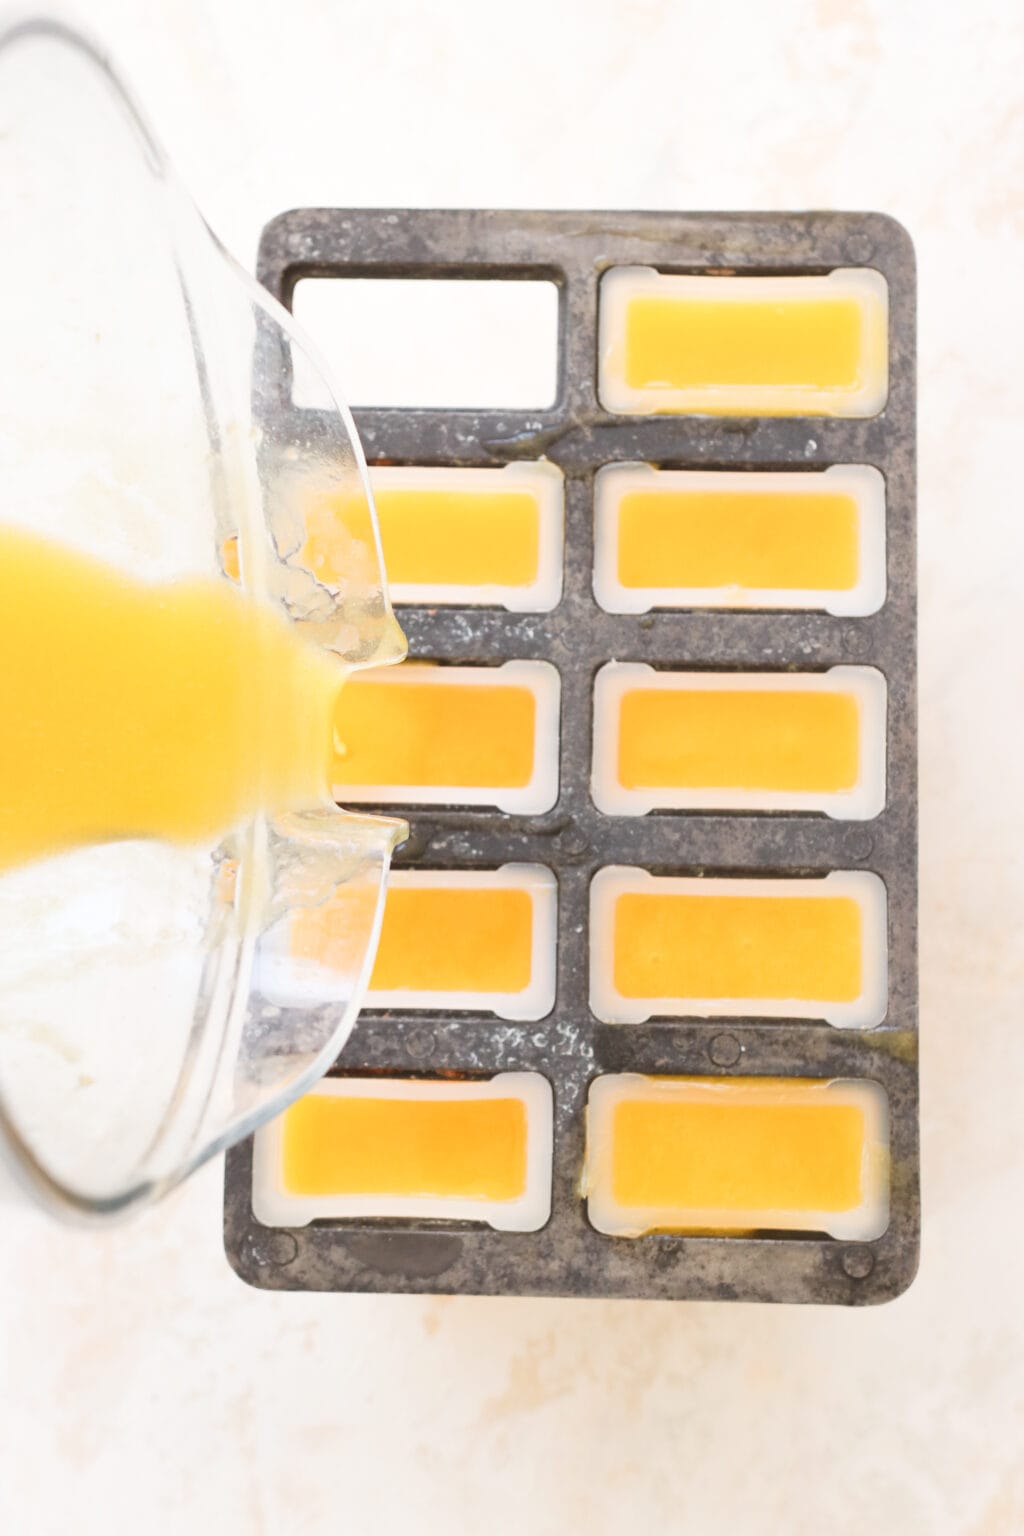 An overhead photo of a blender pouring an orange yellow liquid into popsicle molds.